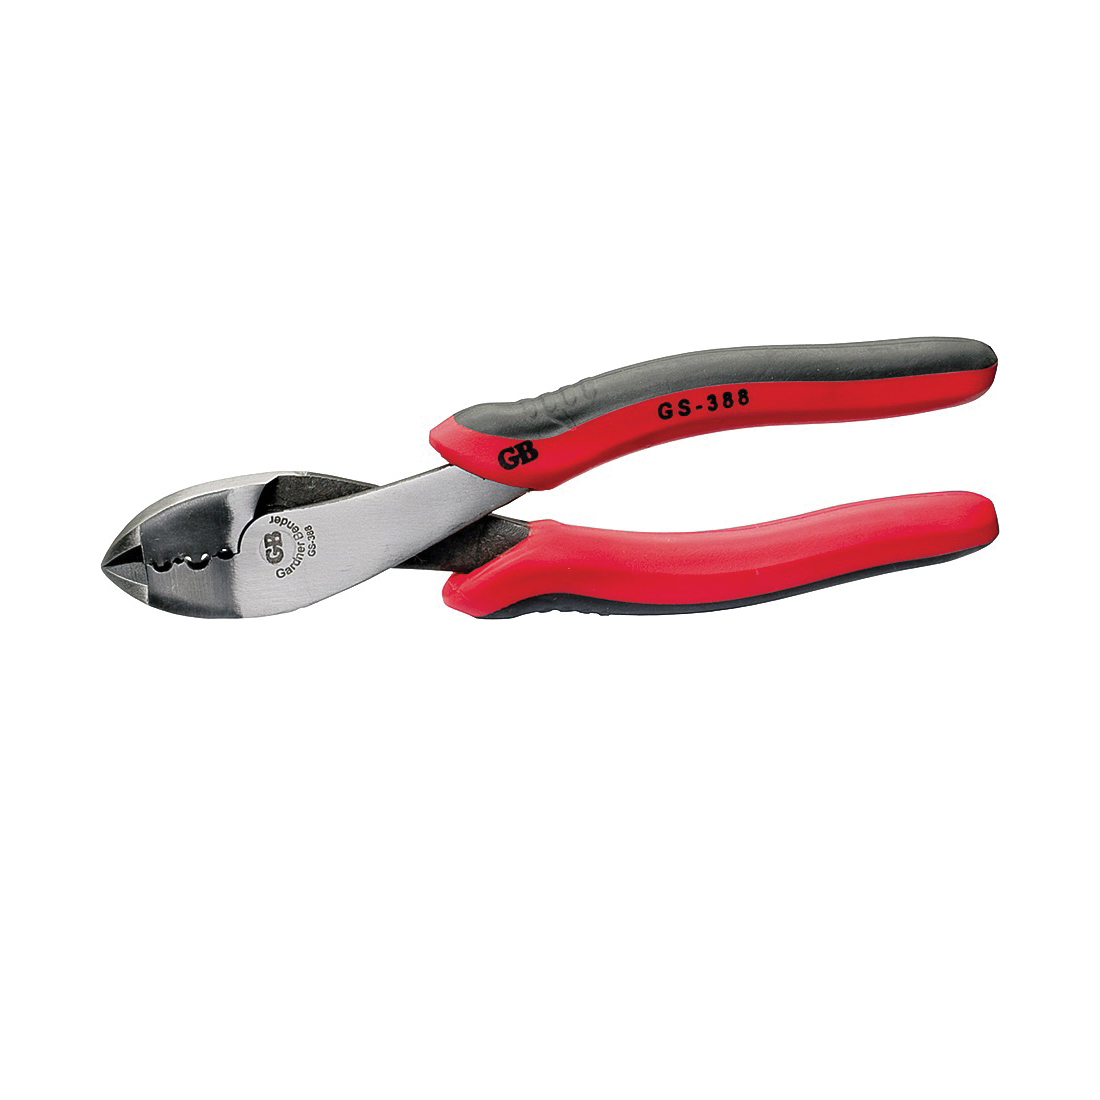 GS-388 Crimping Plier, 8 in OAL, High-Leverage Handle